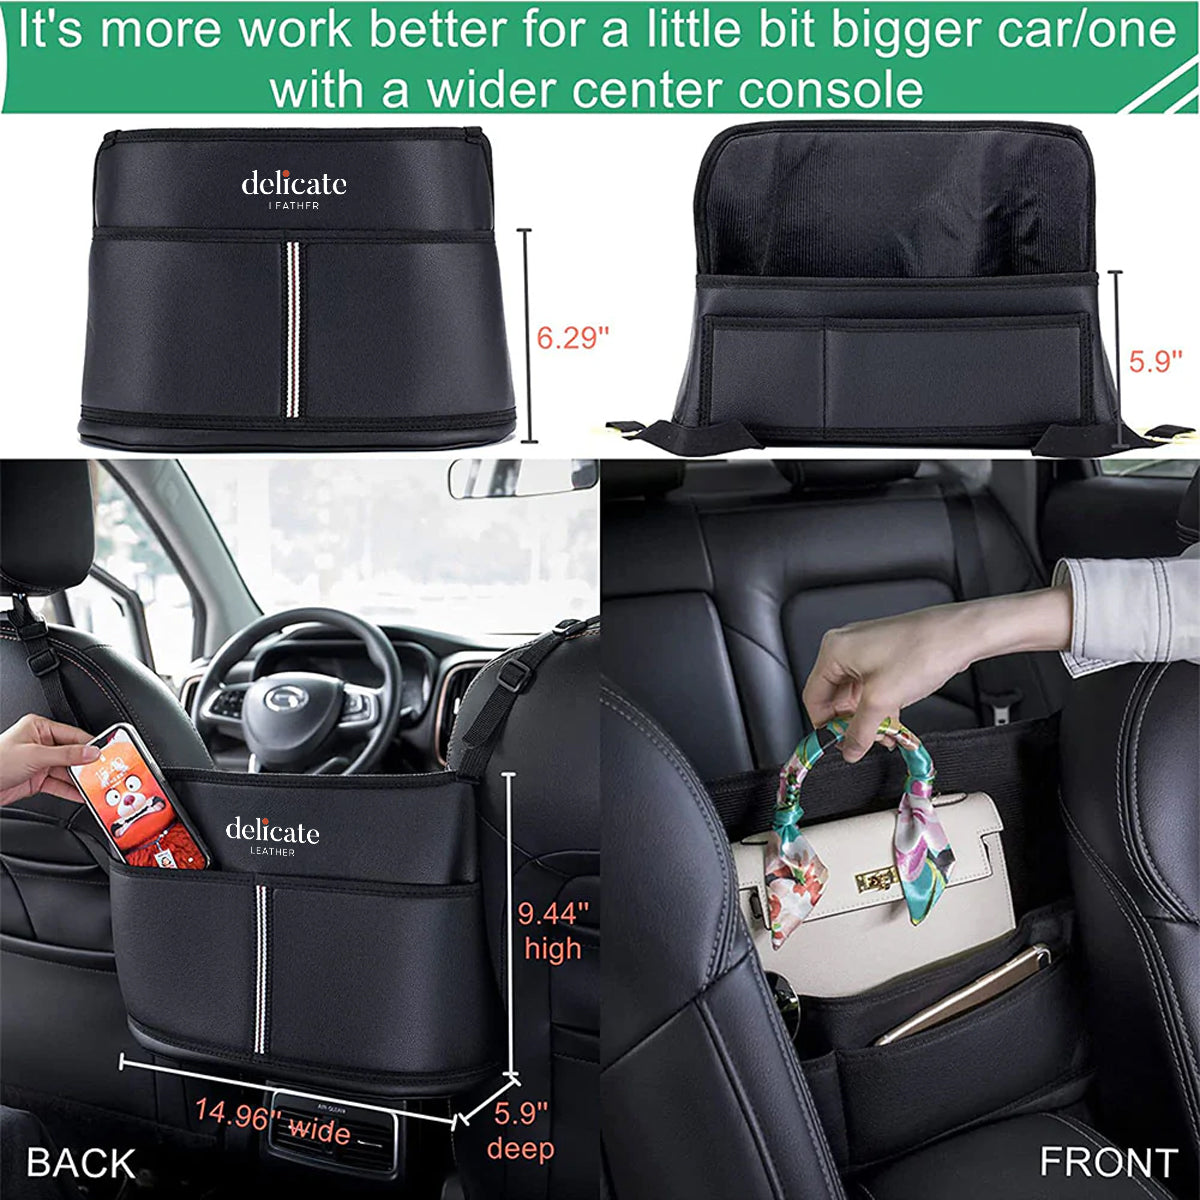 Car Purse Holder for Car Handbag Holder Between Seats Premium PU Leather, Custom Fit For Your Cars, Auto Driver Or Passenger Accessories Organizer, Hanging Car Purse Storage Pocket Back Seat Pet Barrier KO11991 - Delicate Leather